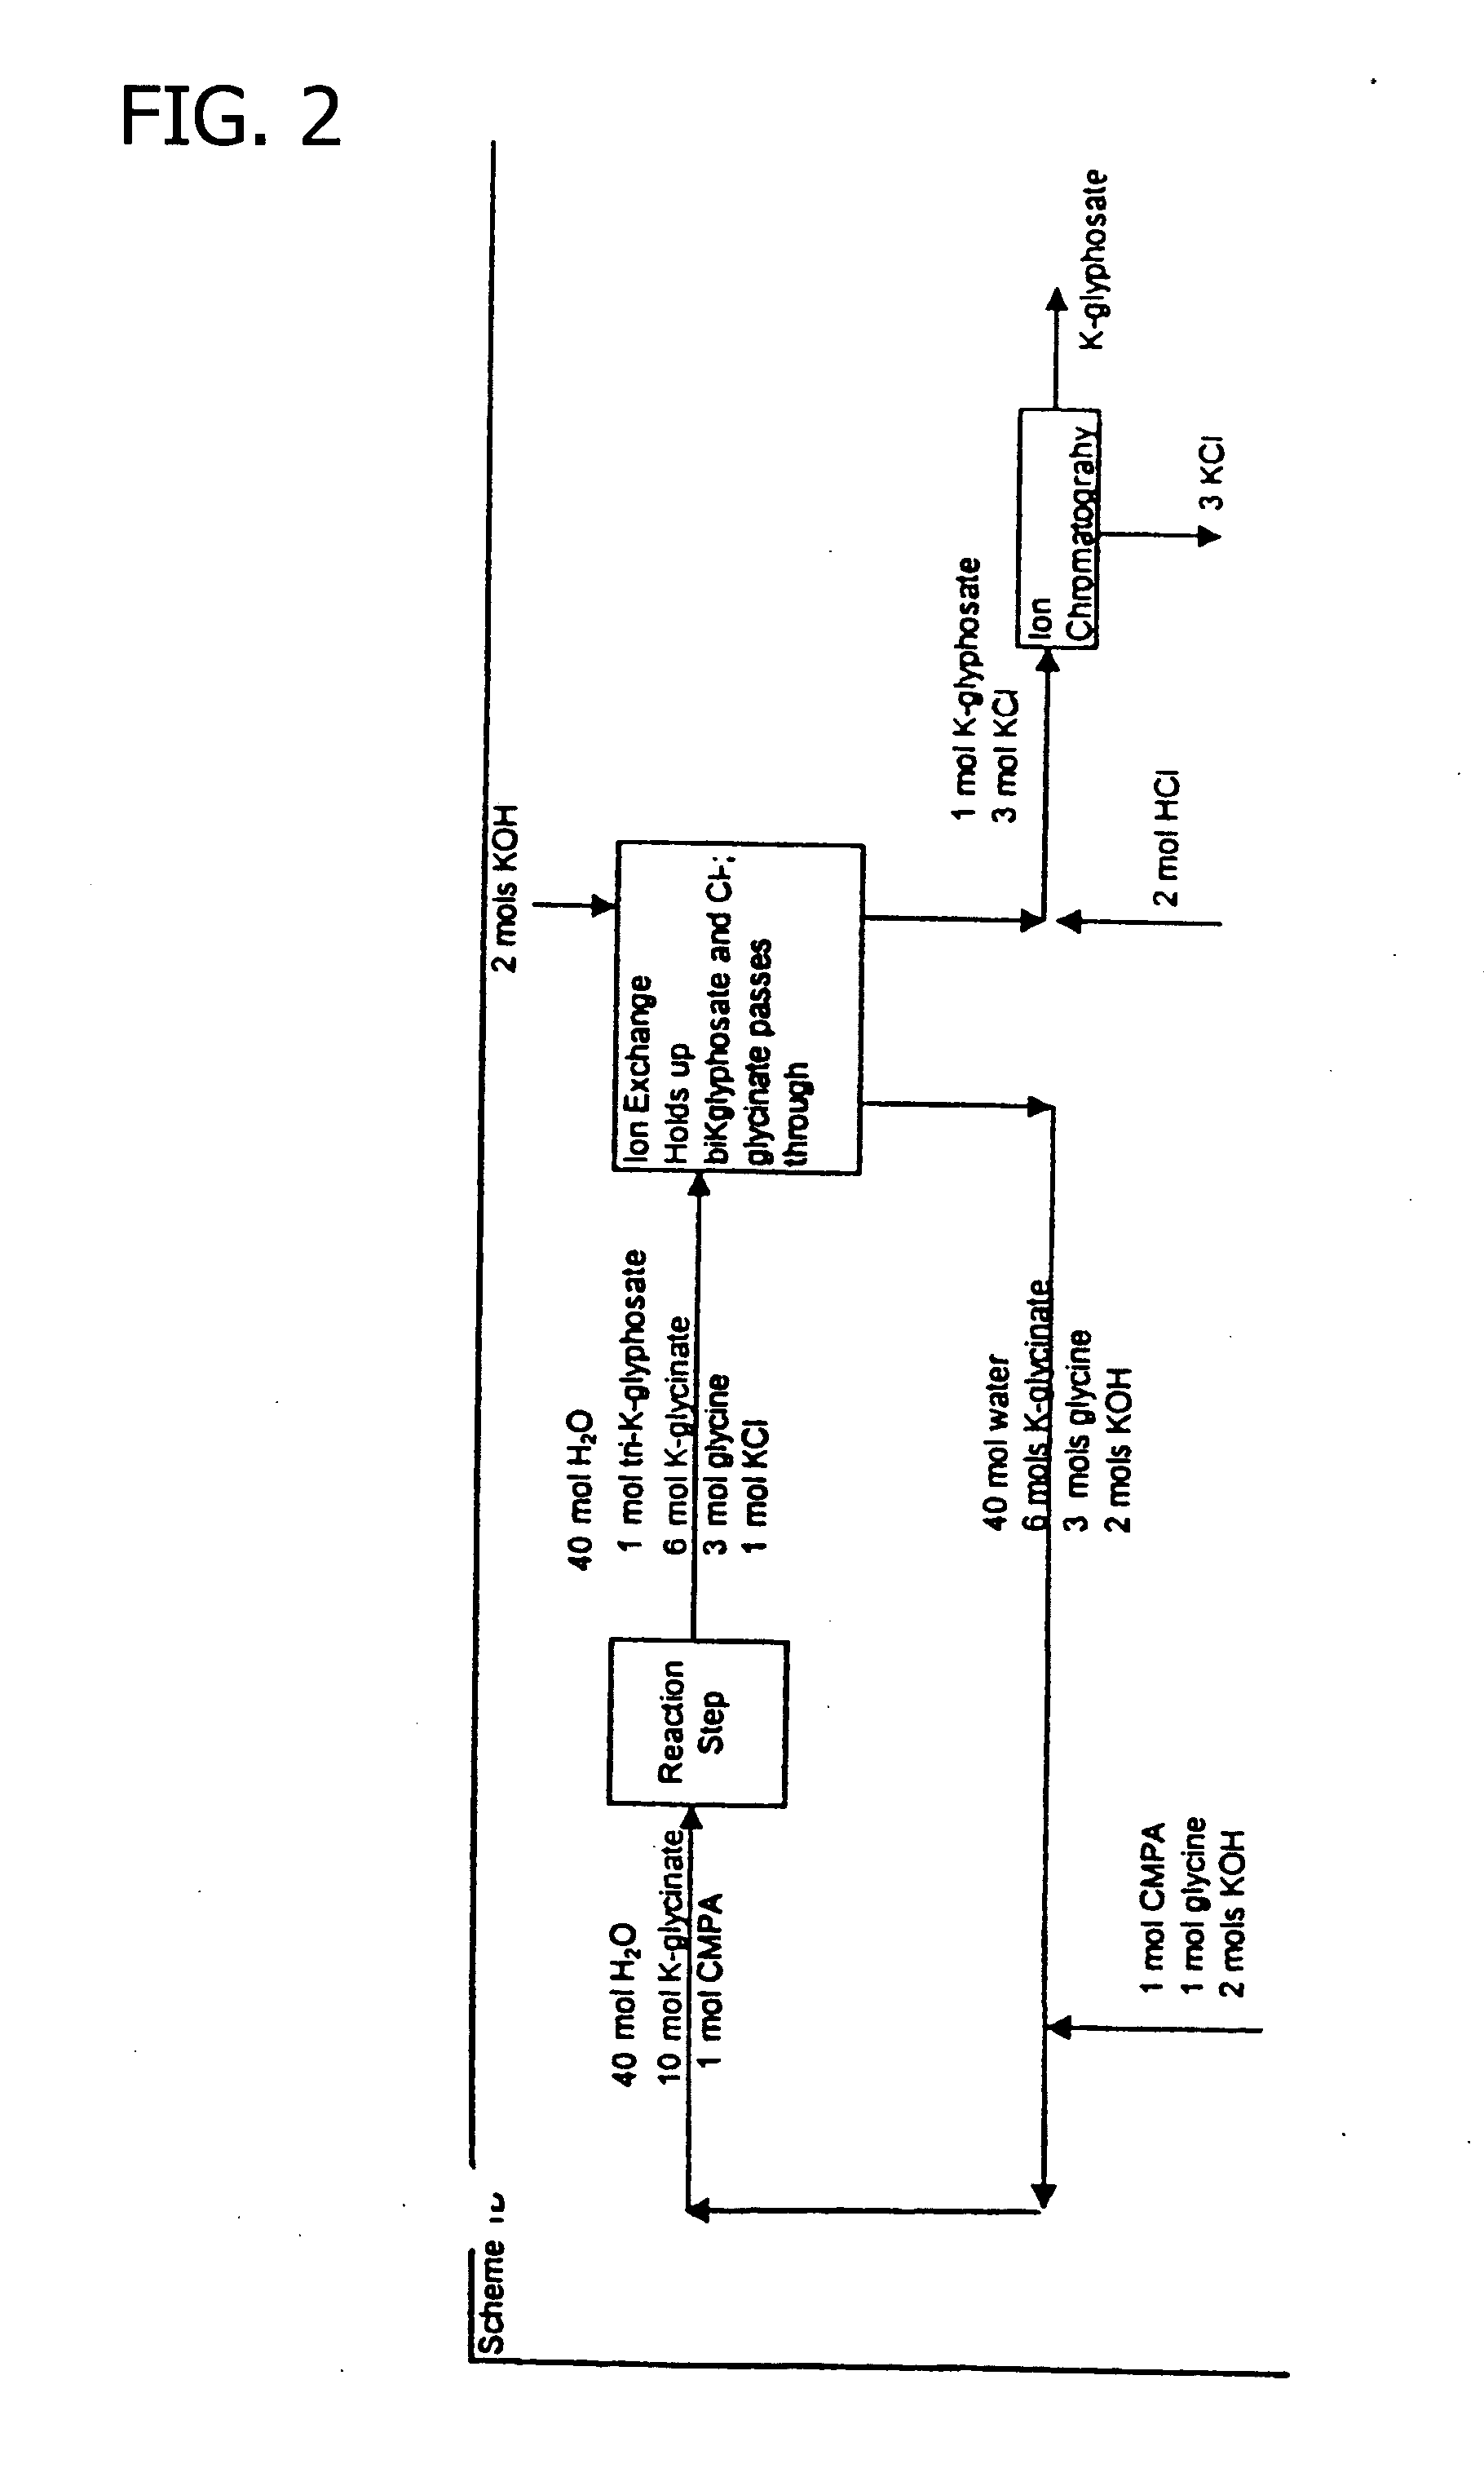 Process for the preparation of N-phosphonomethylglycine and derivatives thereof